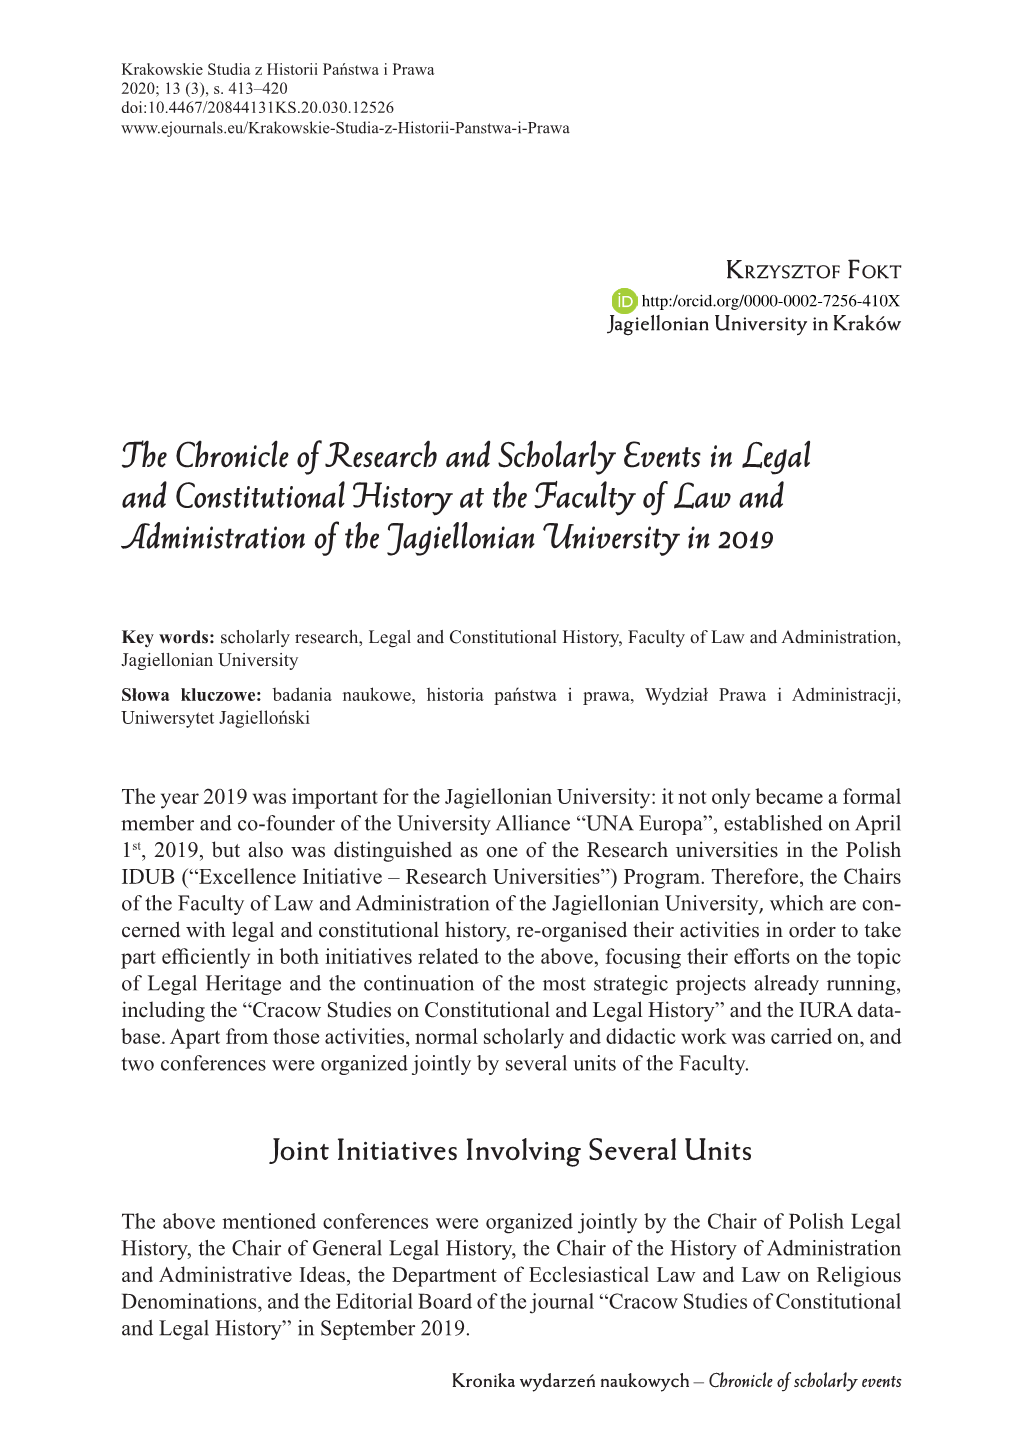 The Chronicle of Research and Scholarly Events in Legal and Constitutional History at the Faculty of Law and Administration of the Jagiellonian University in 2019